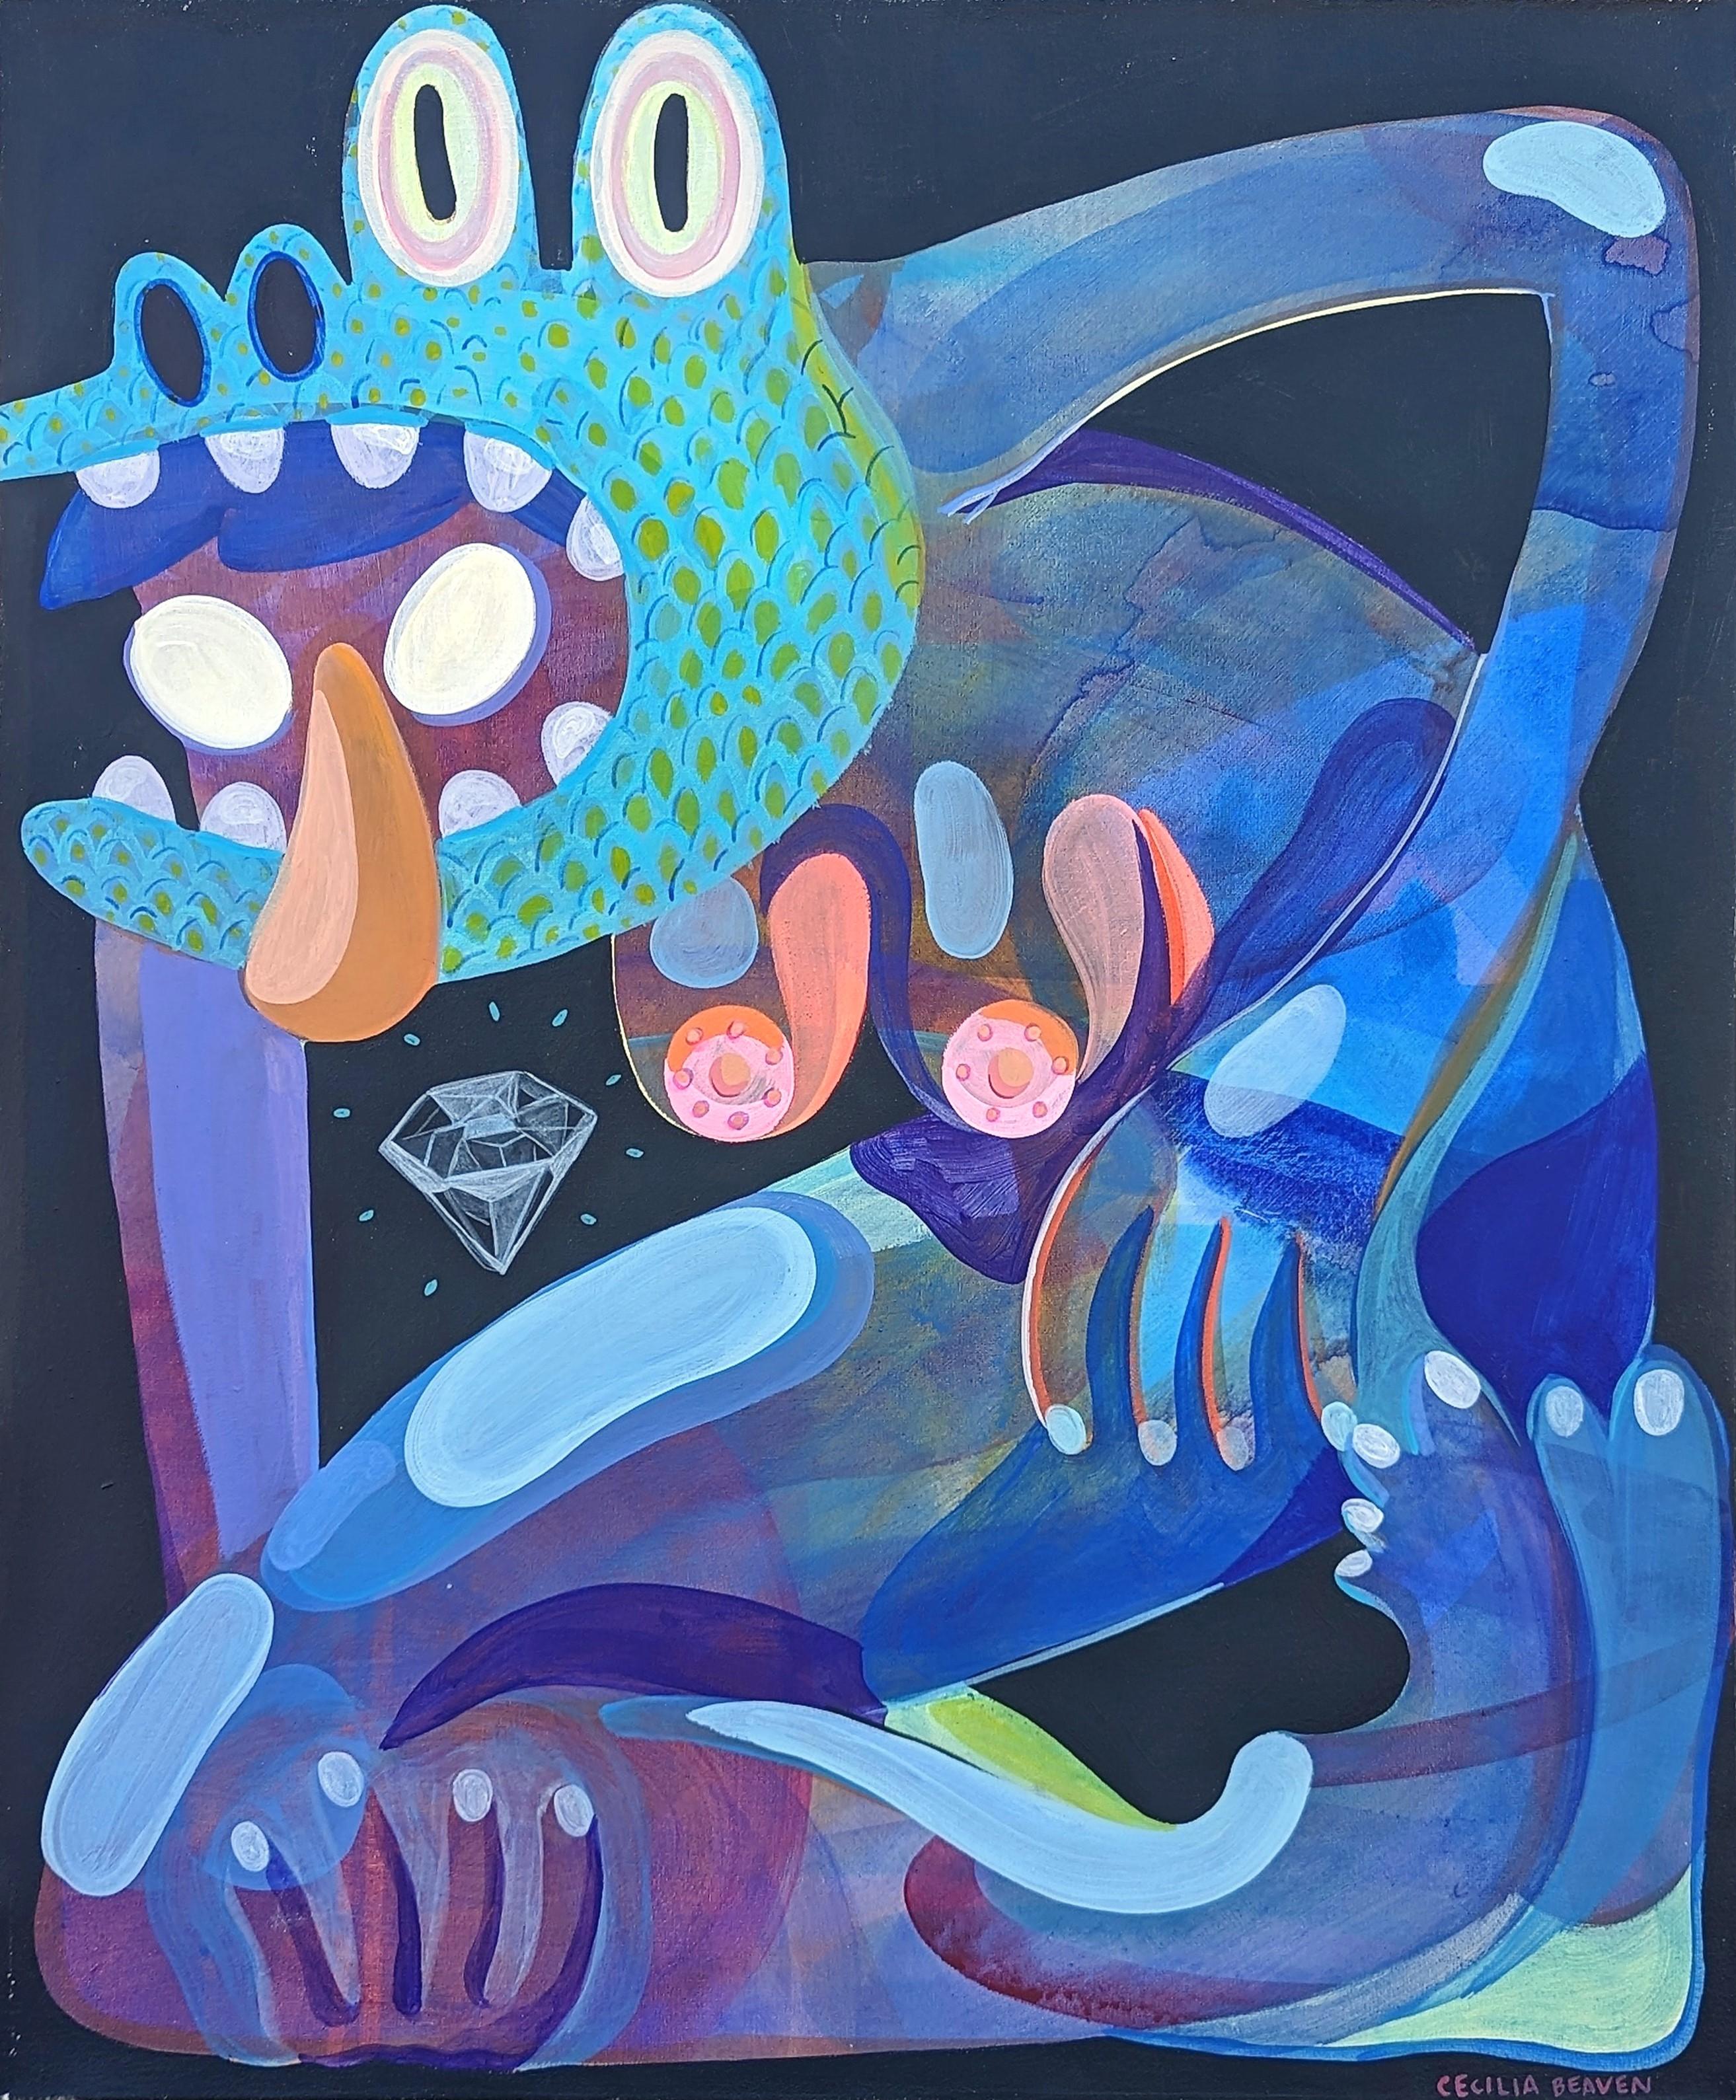 Cecilia Beaven Figurative Painting - Contemporary Abstract Green, Purple, and Blue Biomorphic Lizard Figure Painting